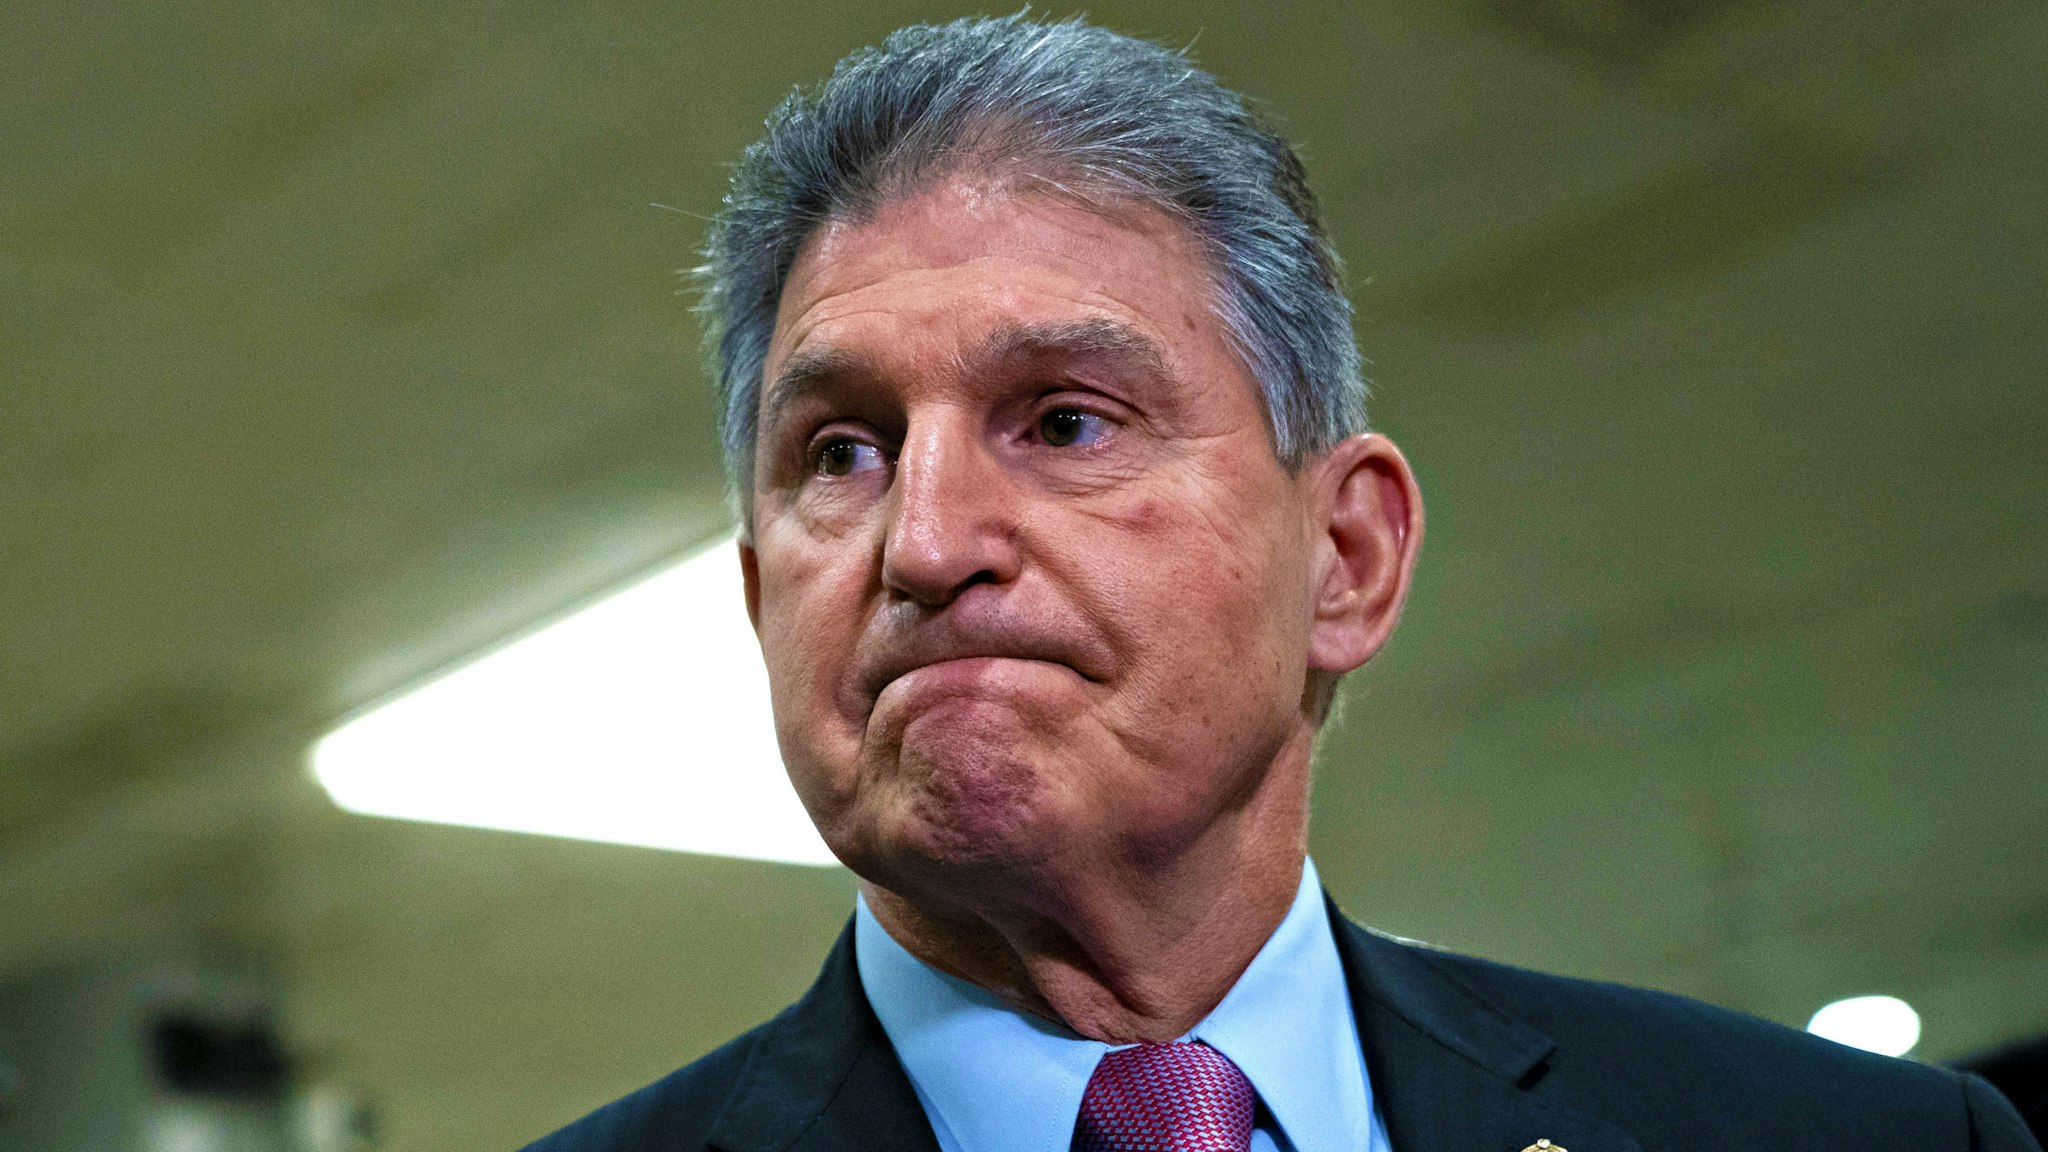 Senator Joe Manchin, a Democrat from West Virginia, pauses while speaking during a news conference in the Senate Subway of the U.S. Capitol in Washington, D.C., U.S., on Wednesday, Feb. 5, 2020. President Donald Trump's inevitable acquittal in the Senate's impeachment trial today has some House Democrats fretting that they should have delivered a more complete case to argue for his removal.